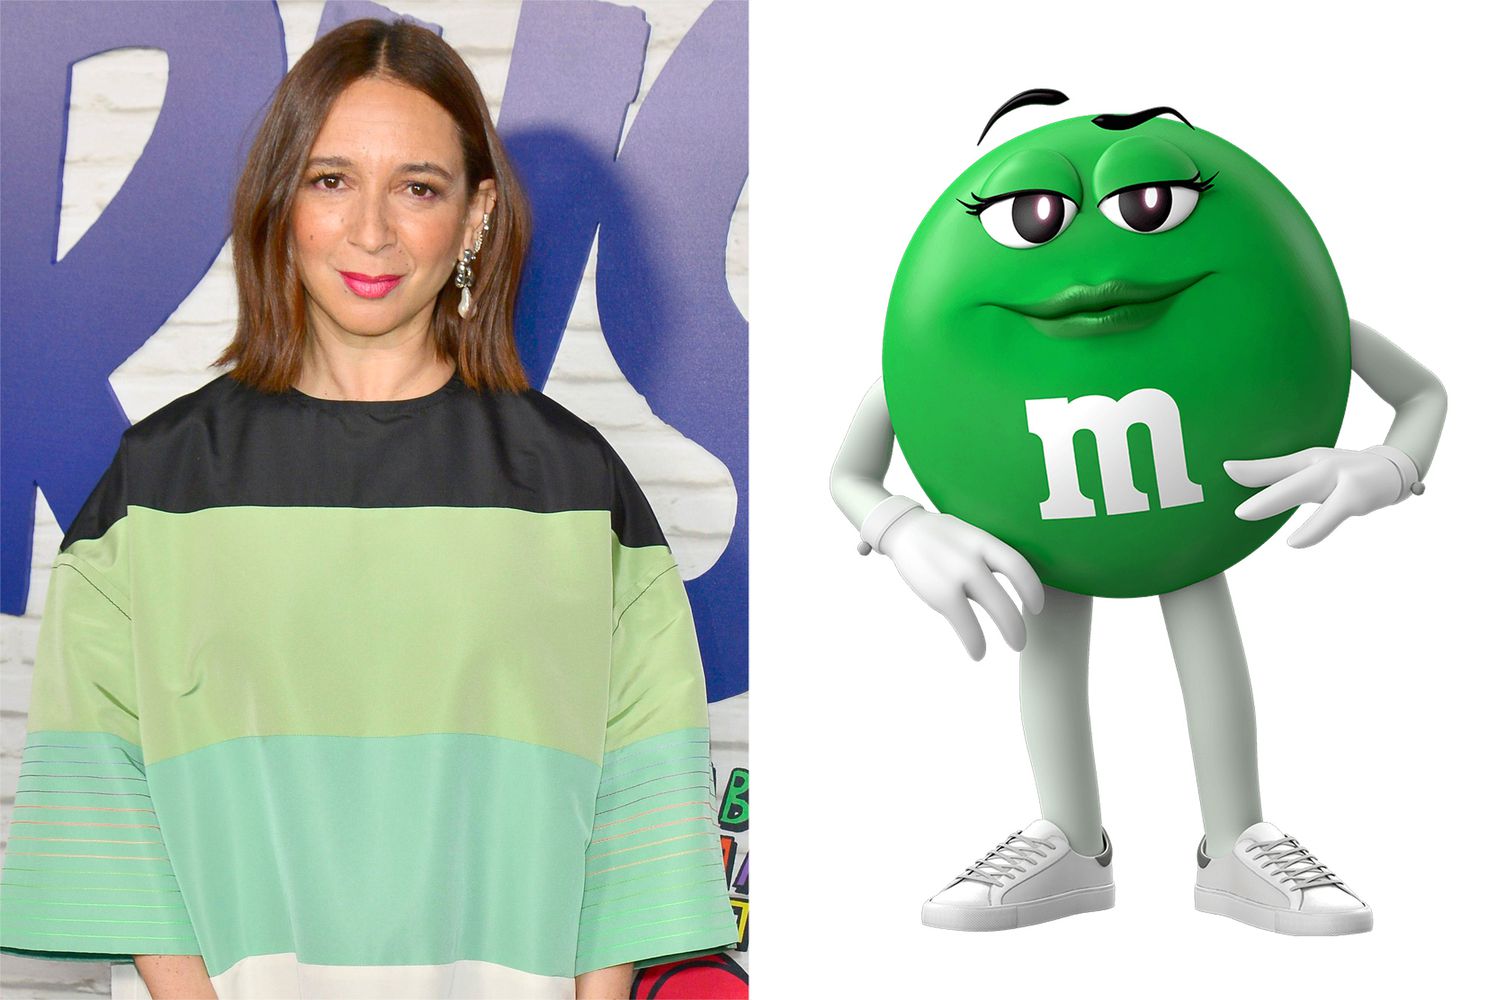 Maya Rudolph has entered the M&M’s spokescandy discourse